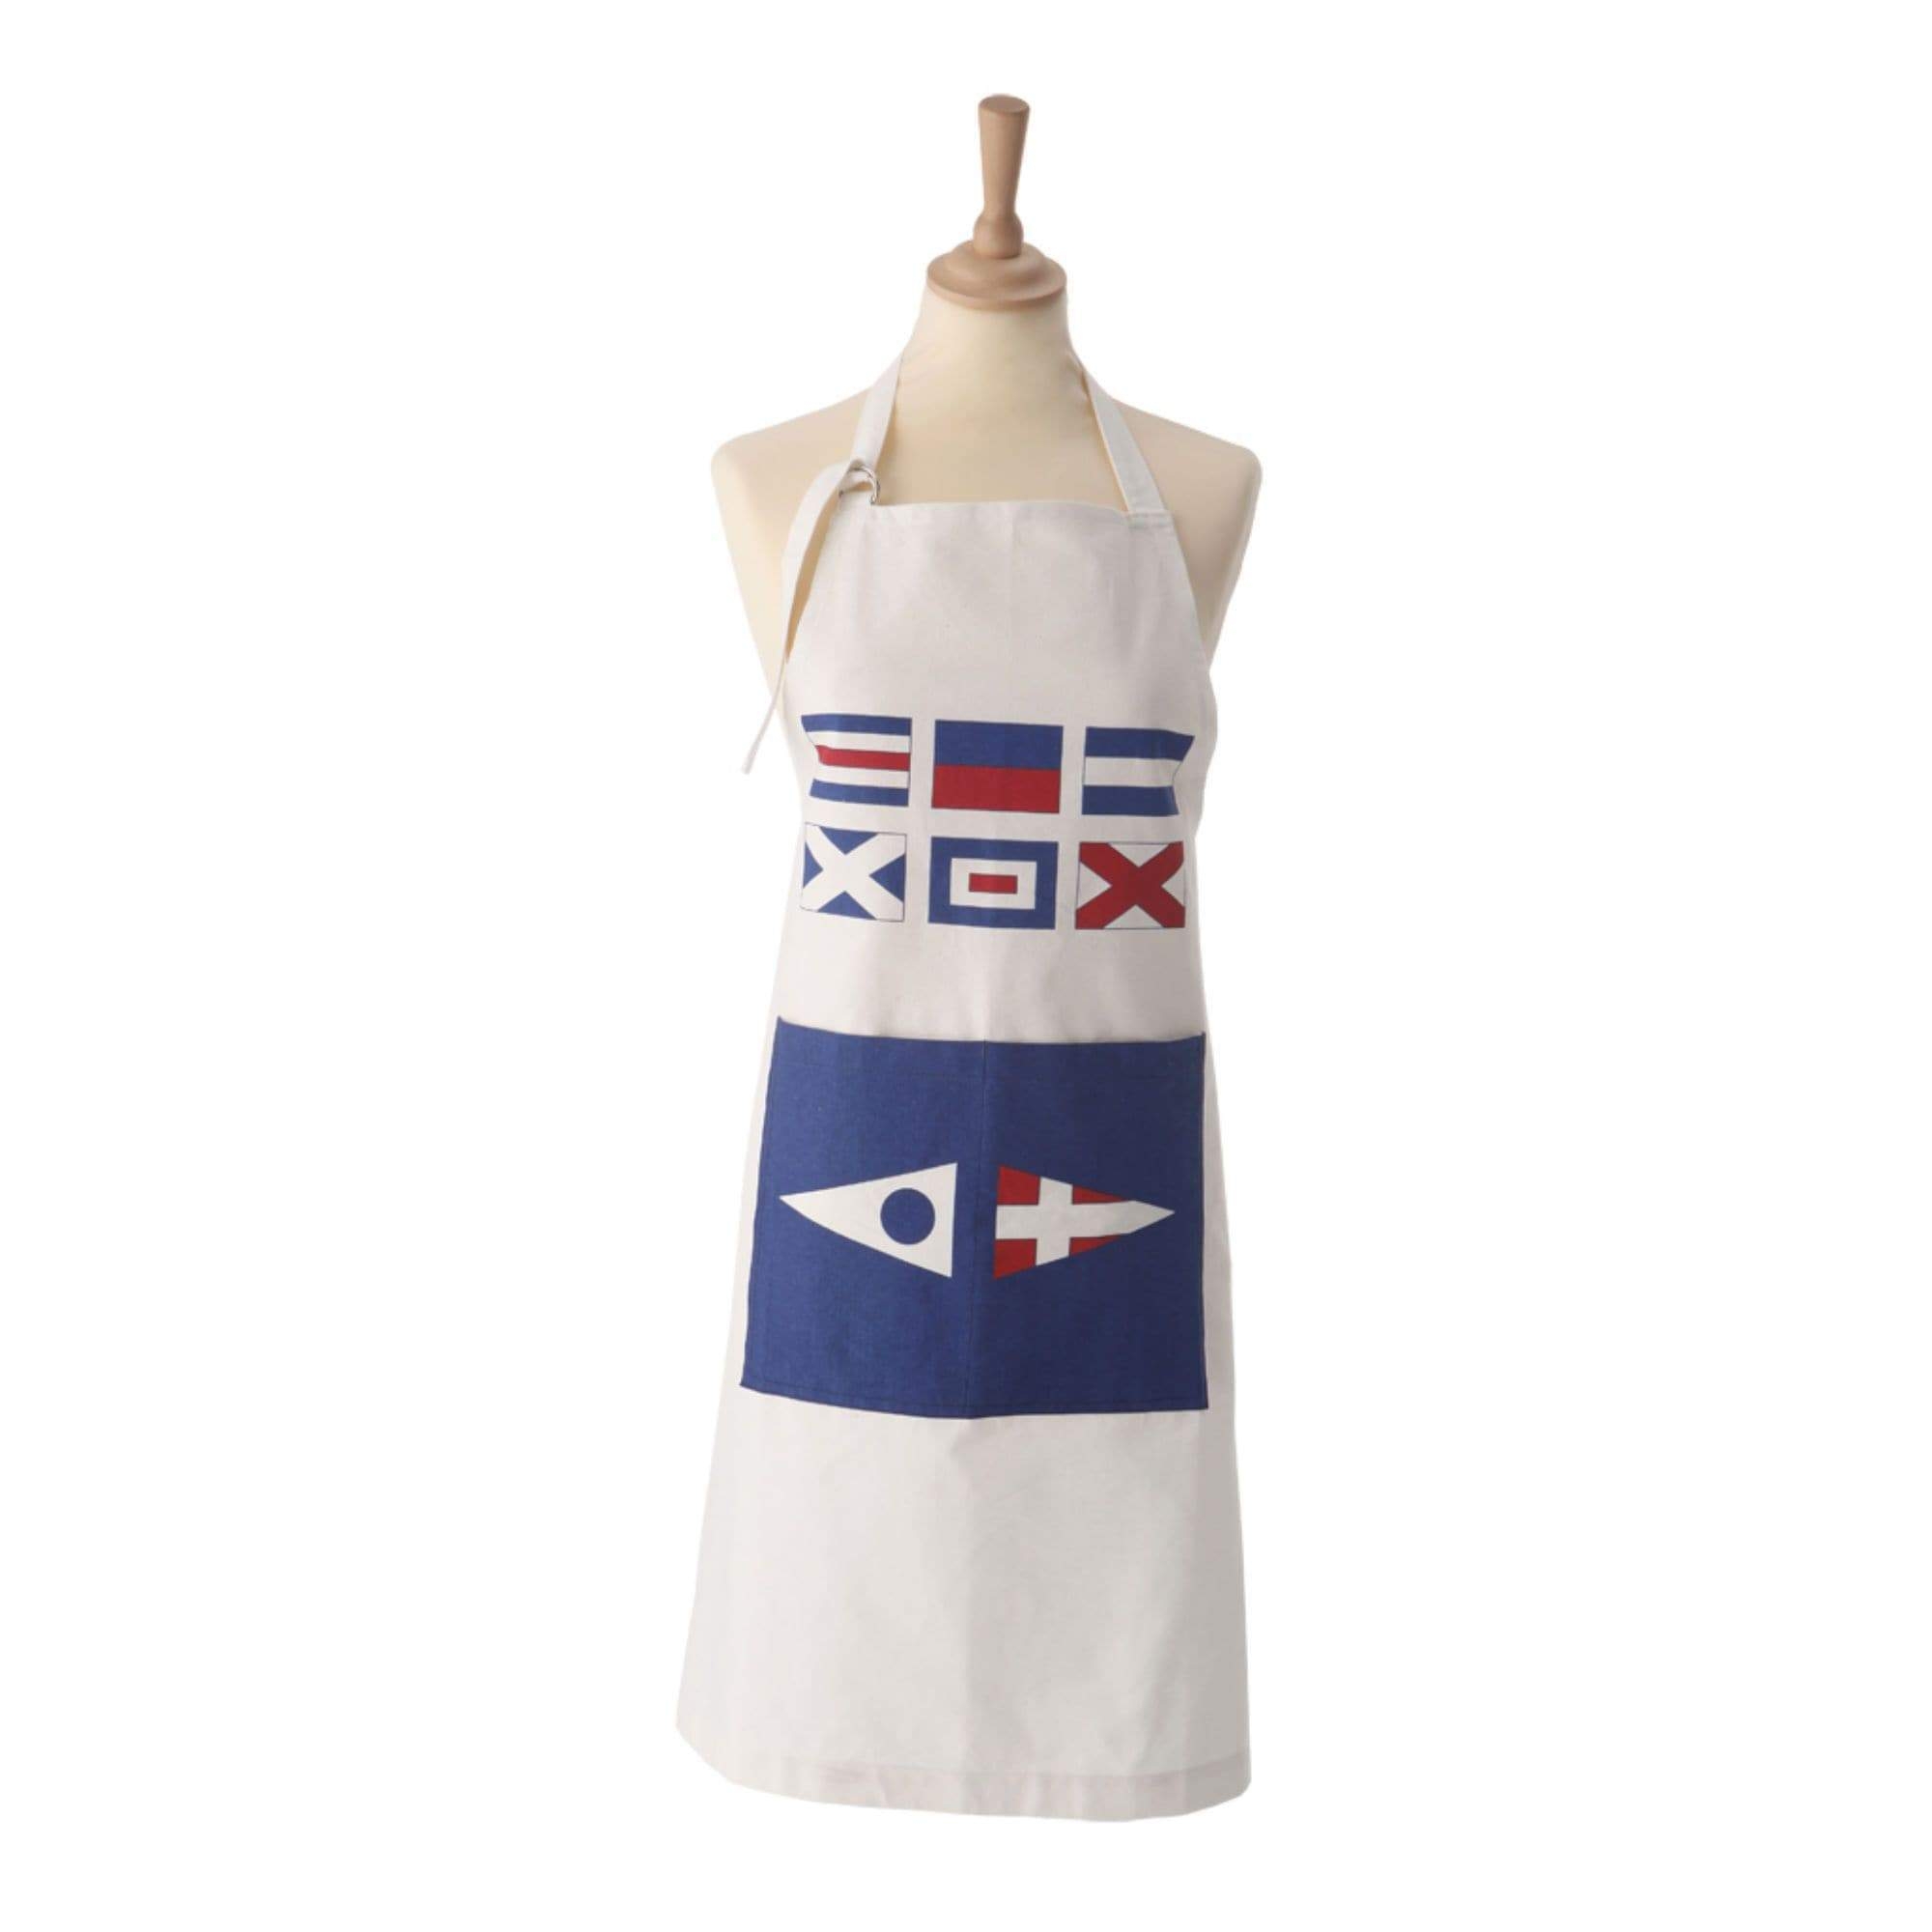 Apron with Flags Design